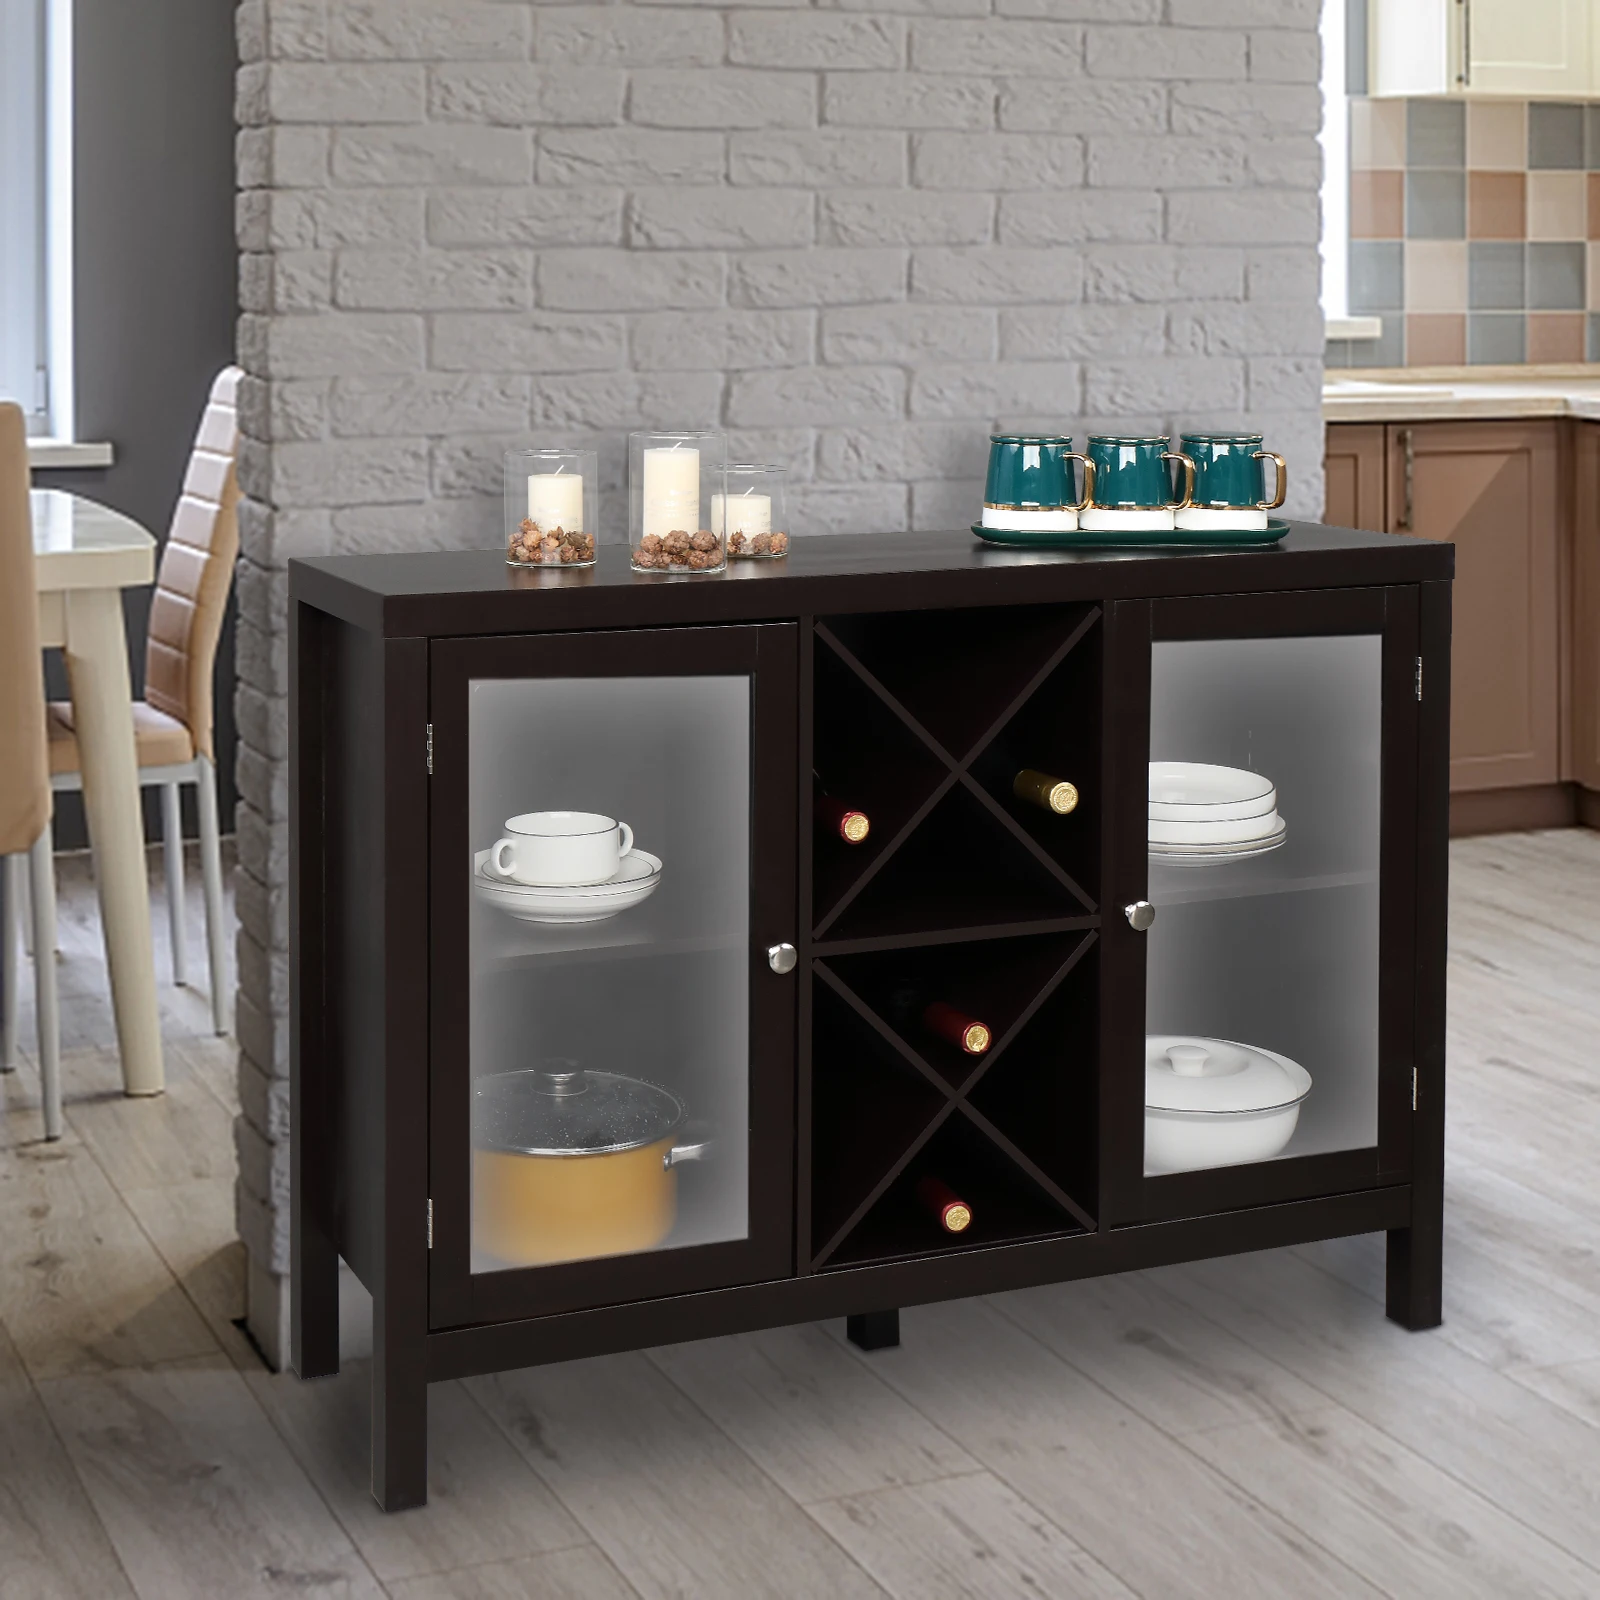 

Kitchen Sideboard Cupboard FCH Transparent Double Door with X-shaped Wine Rack Sideboard Entrance Cabinet Brown